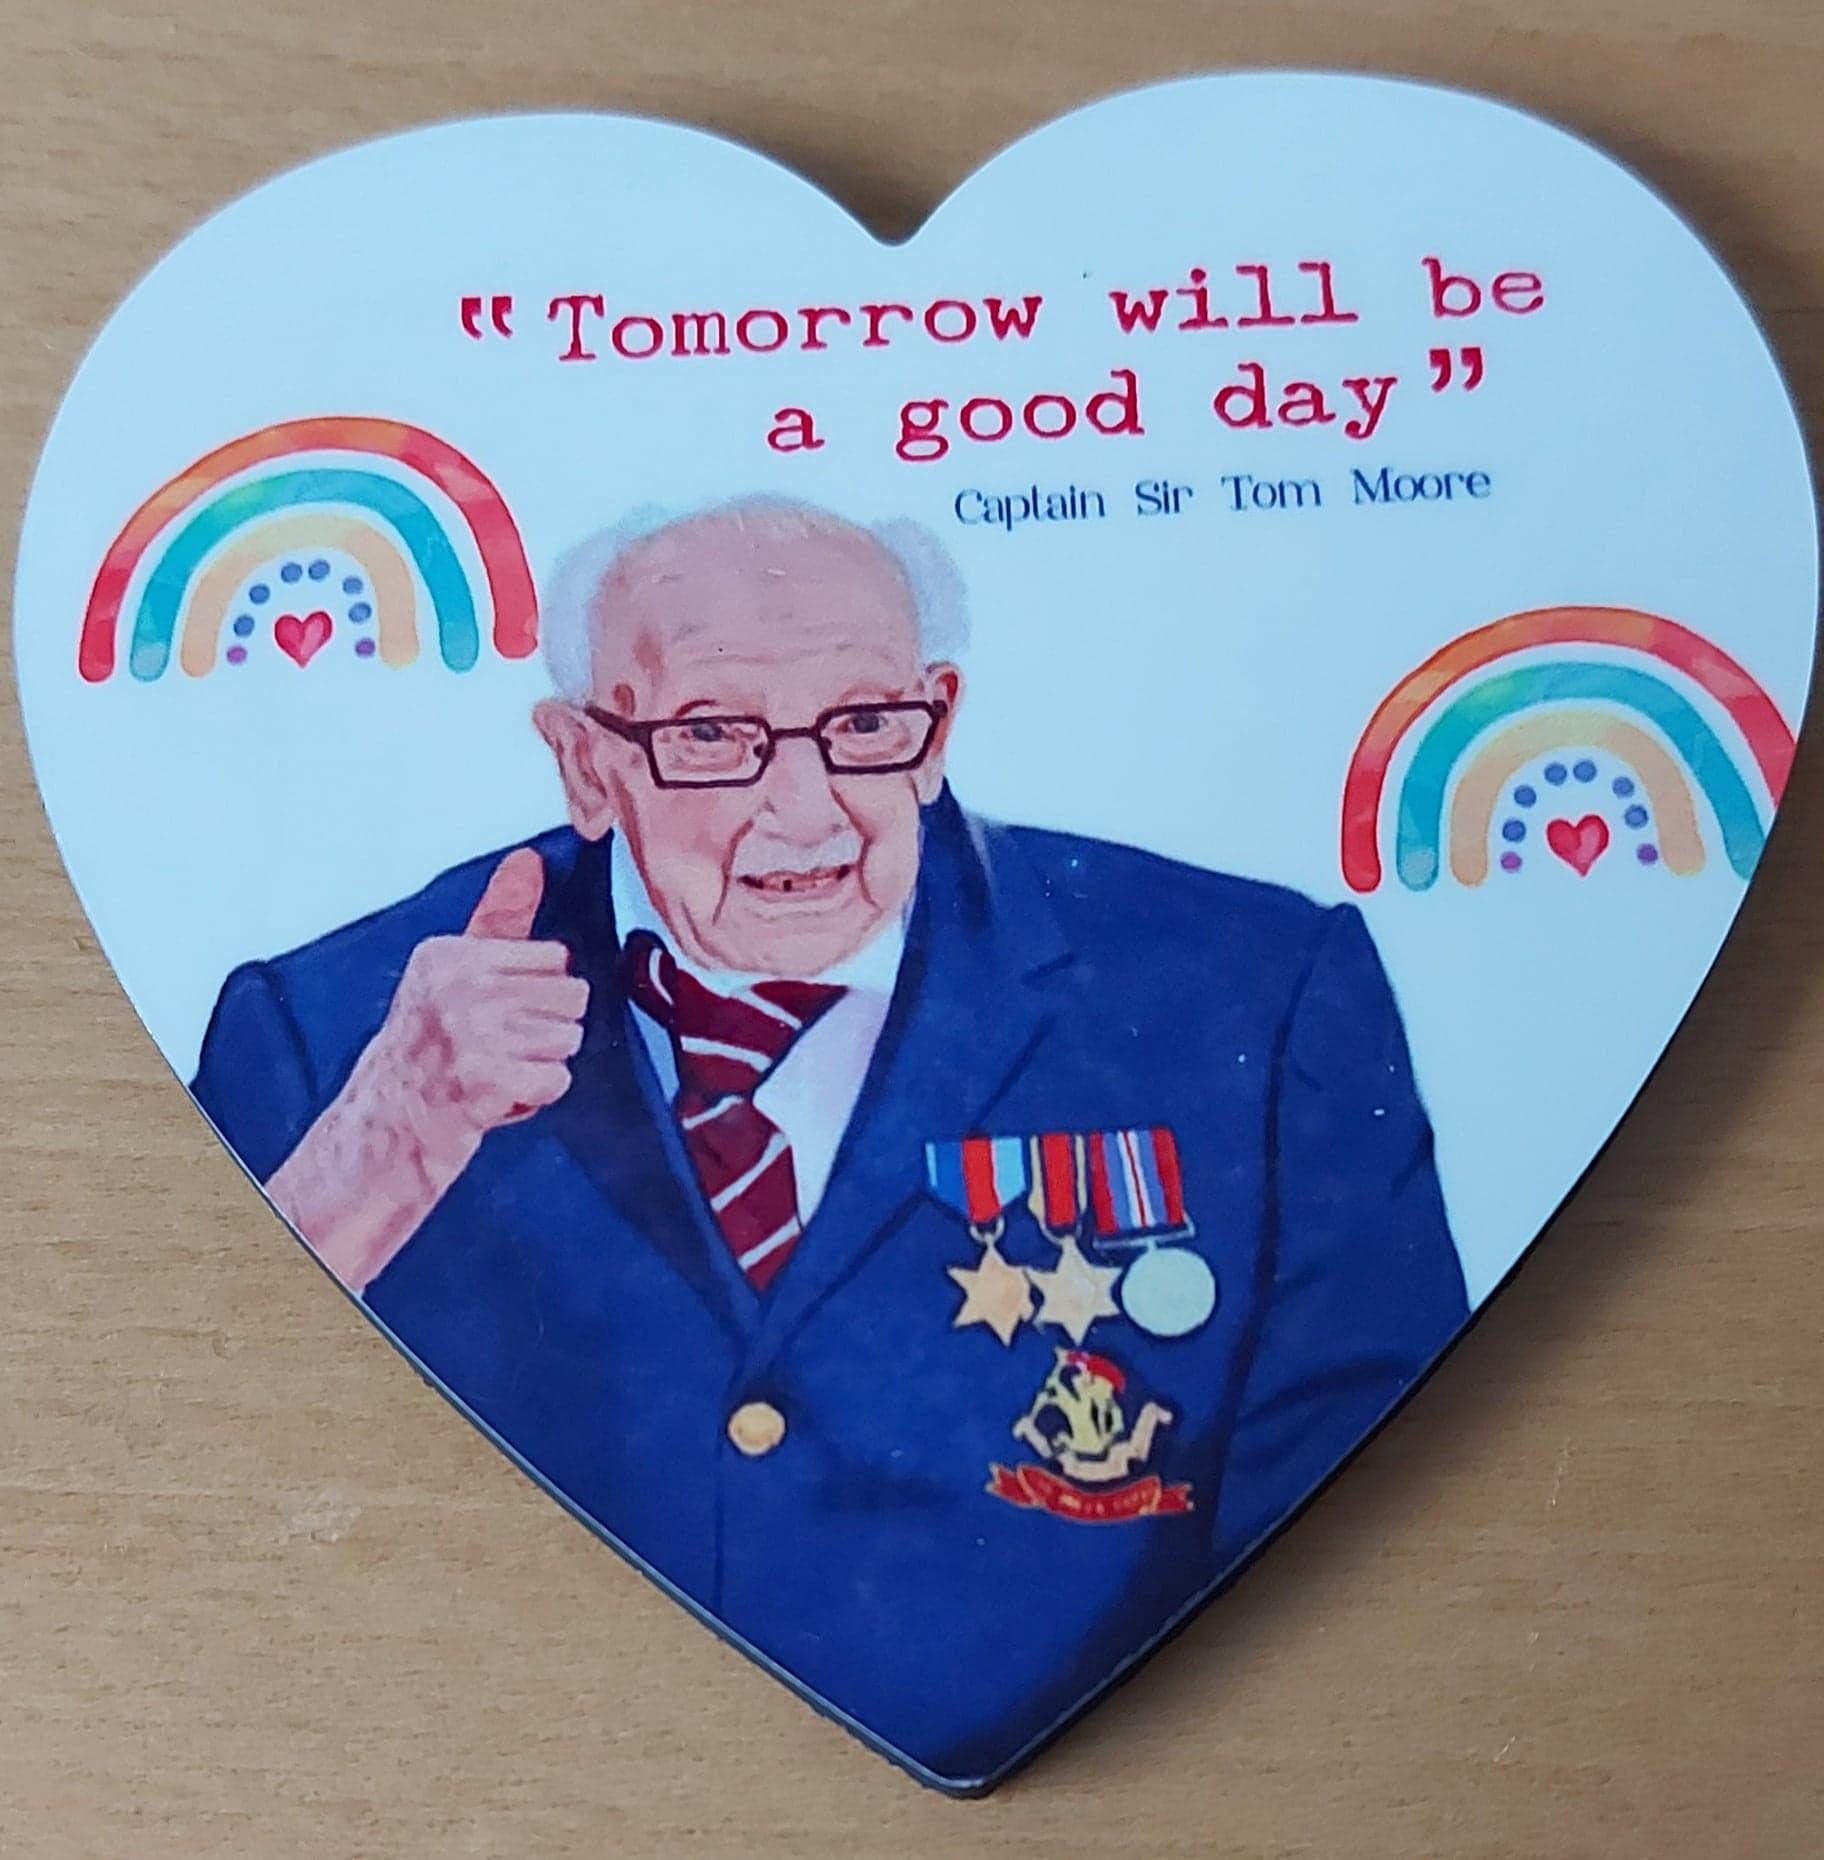 NHS Hero-Captain Sir Tom Moore - Tomorrow will be a good day - Inspirational - motivational coaster - NHS -Rainbow